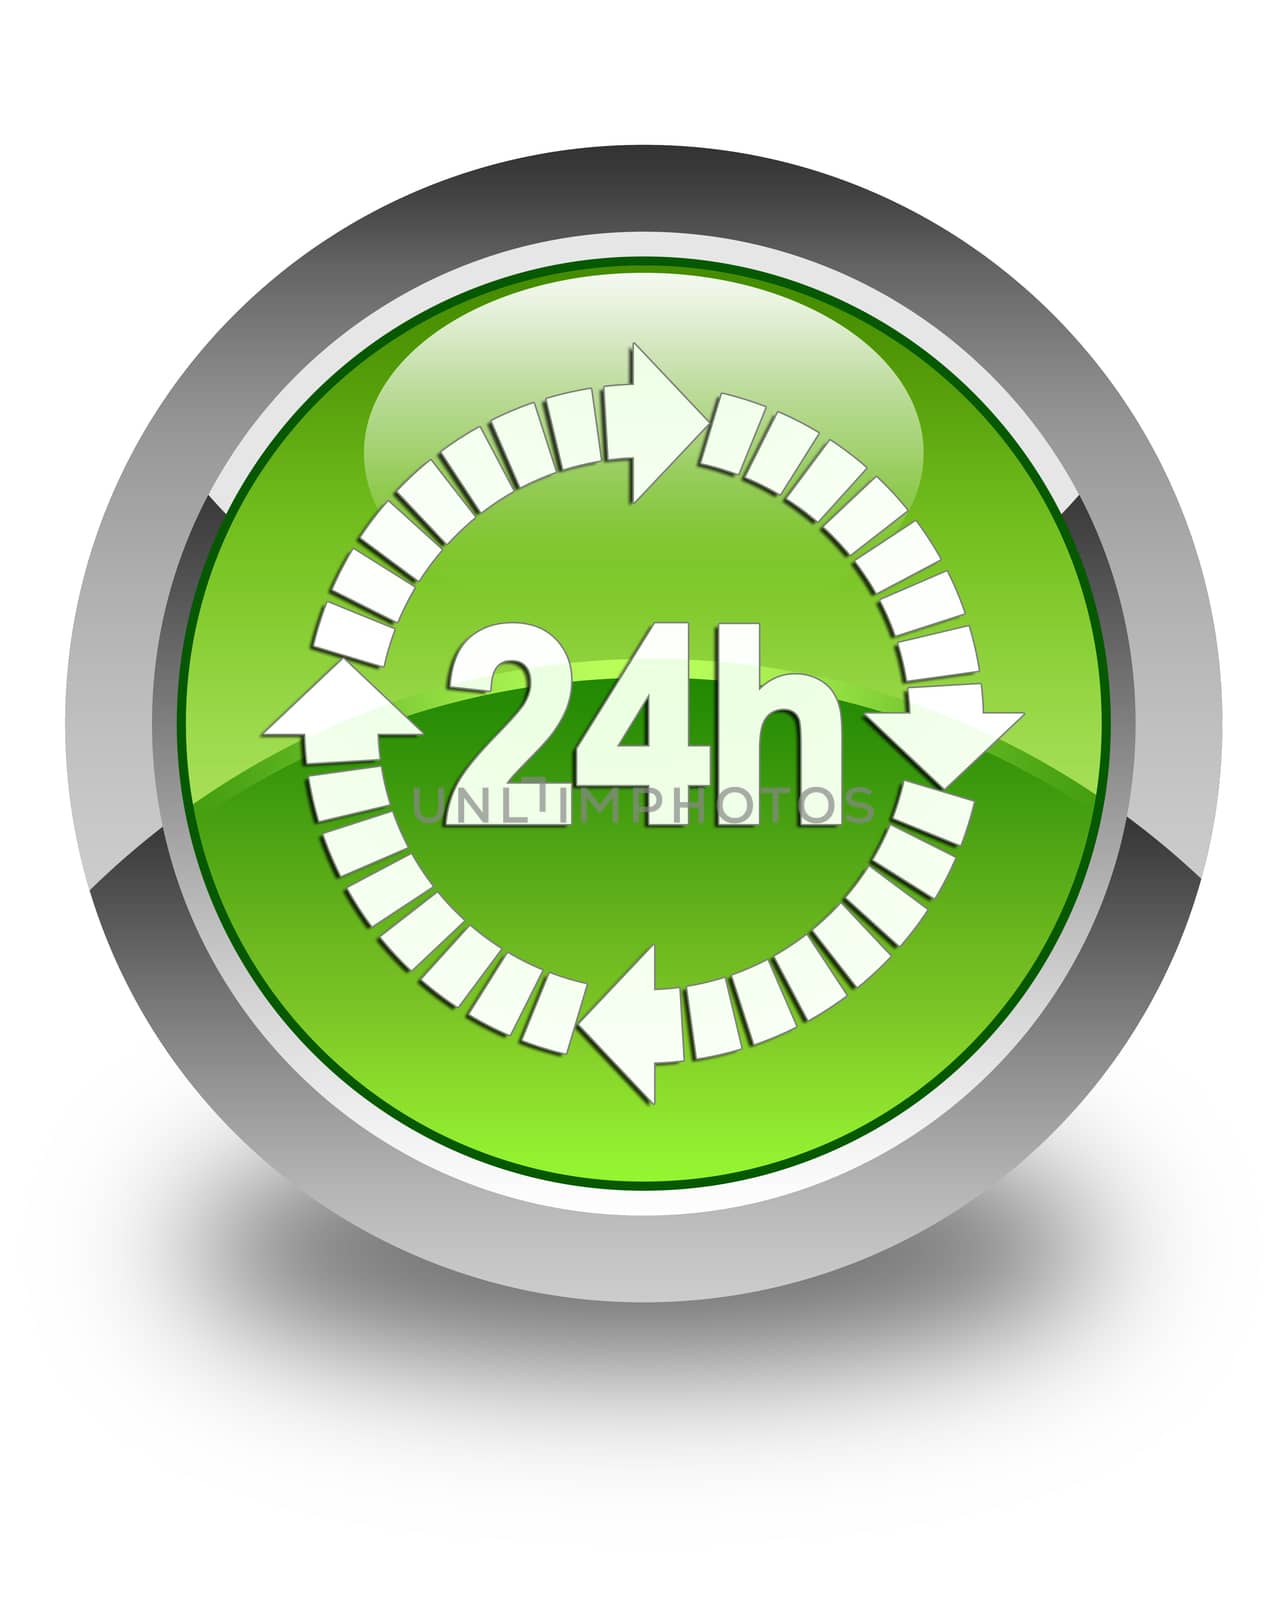 24 hours delivery icon on glossy green round button